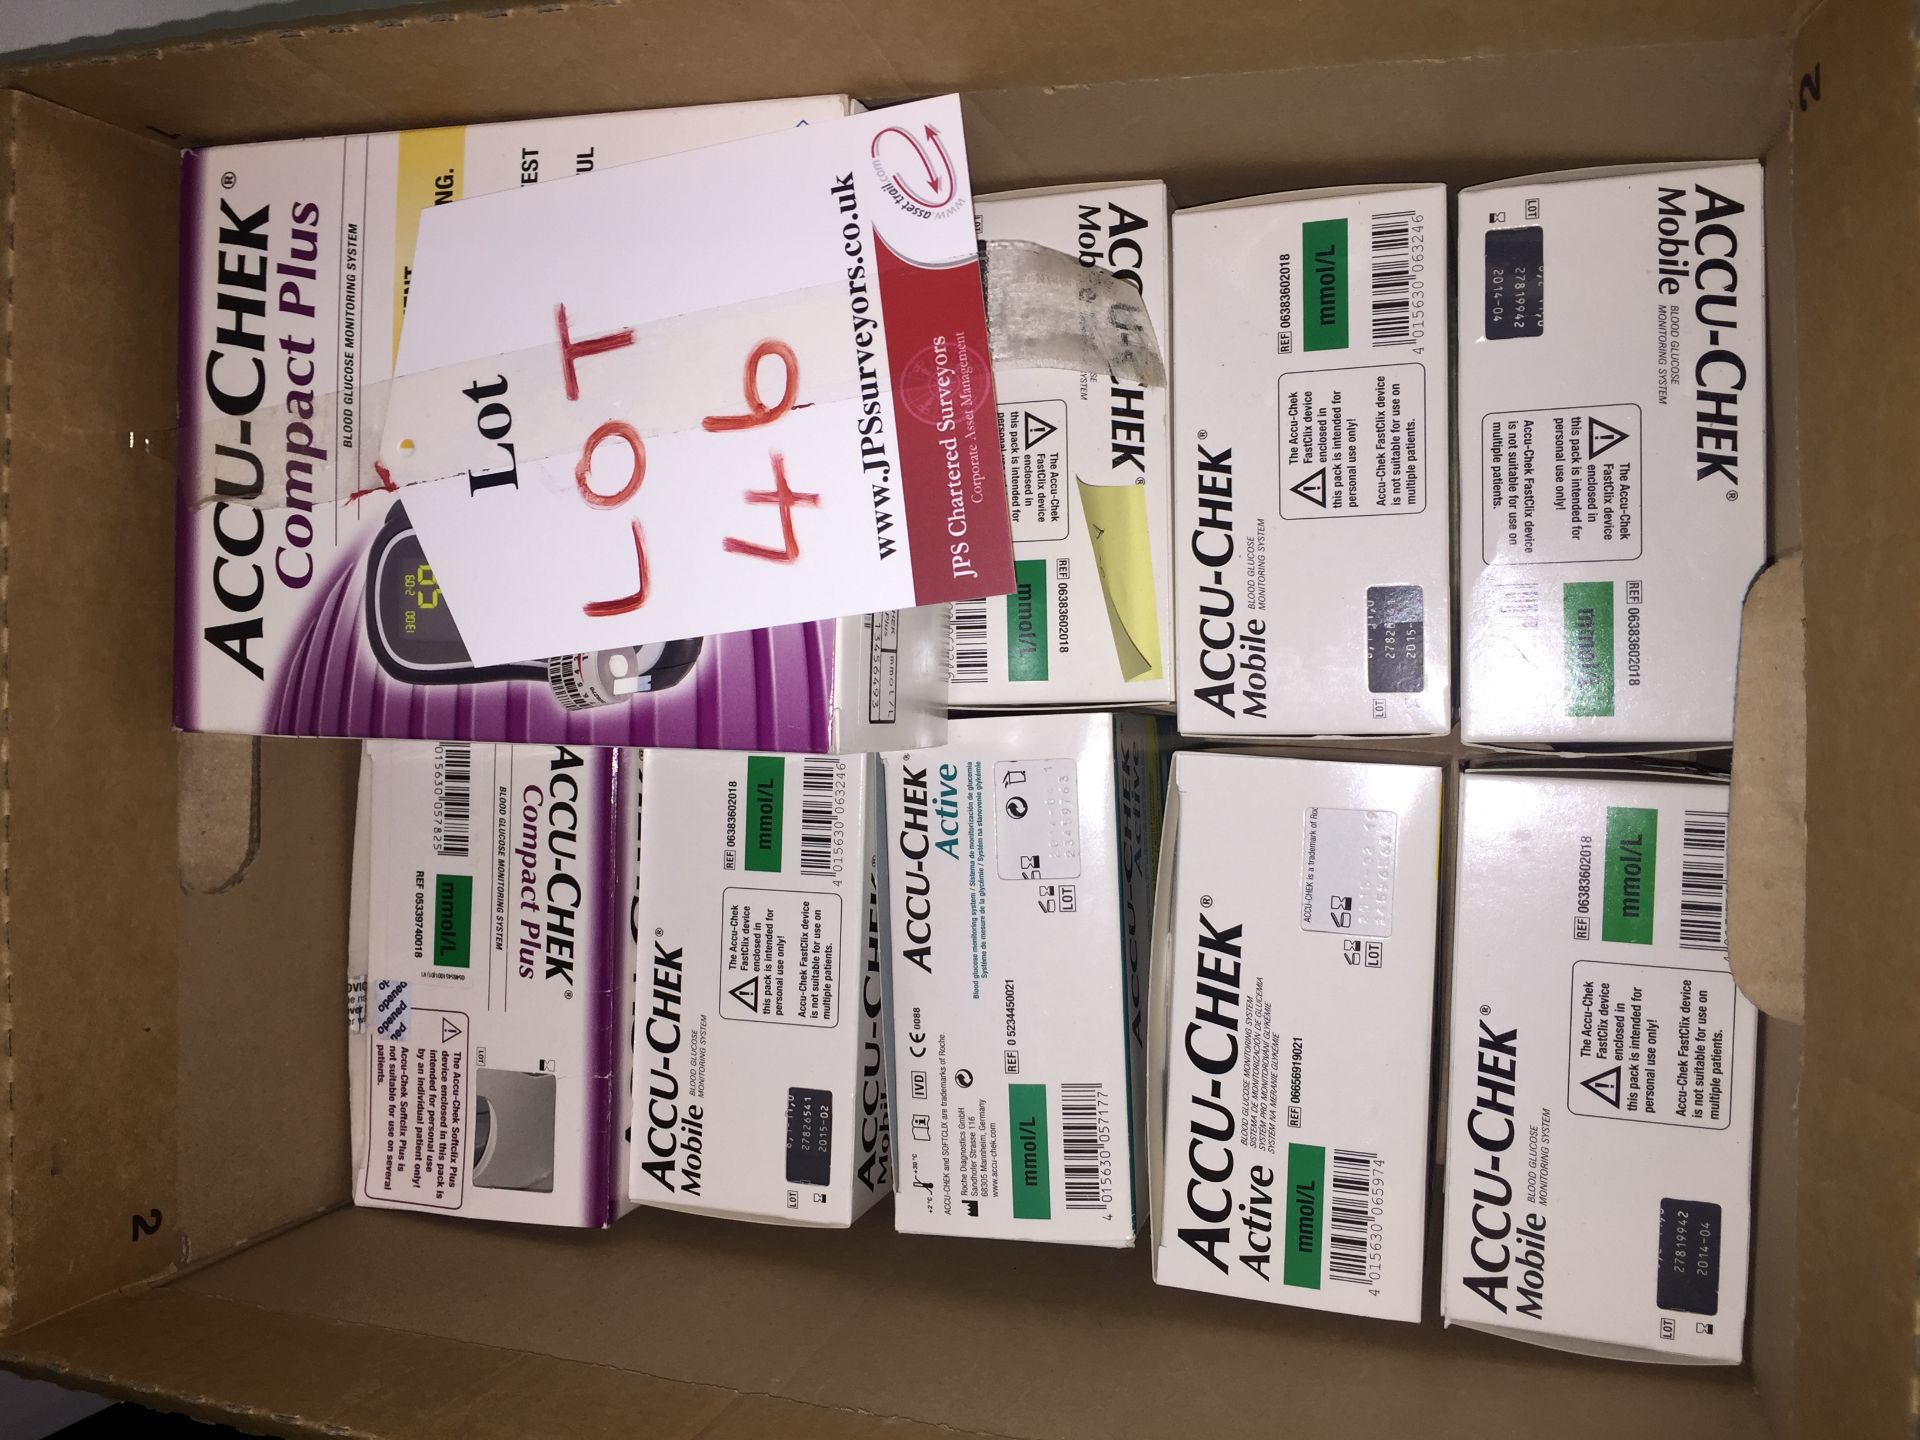 12 x Accu-check blood glucose monitoring systems